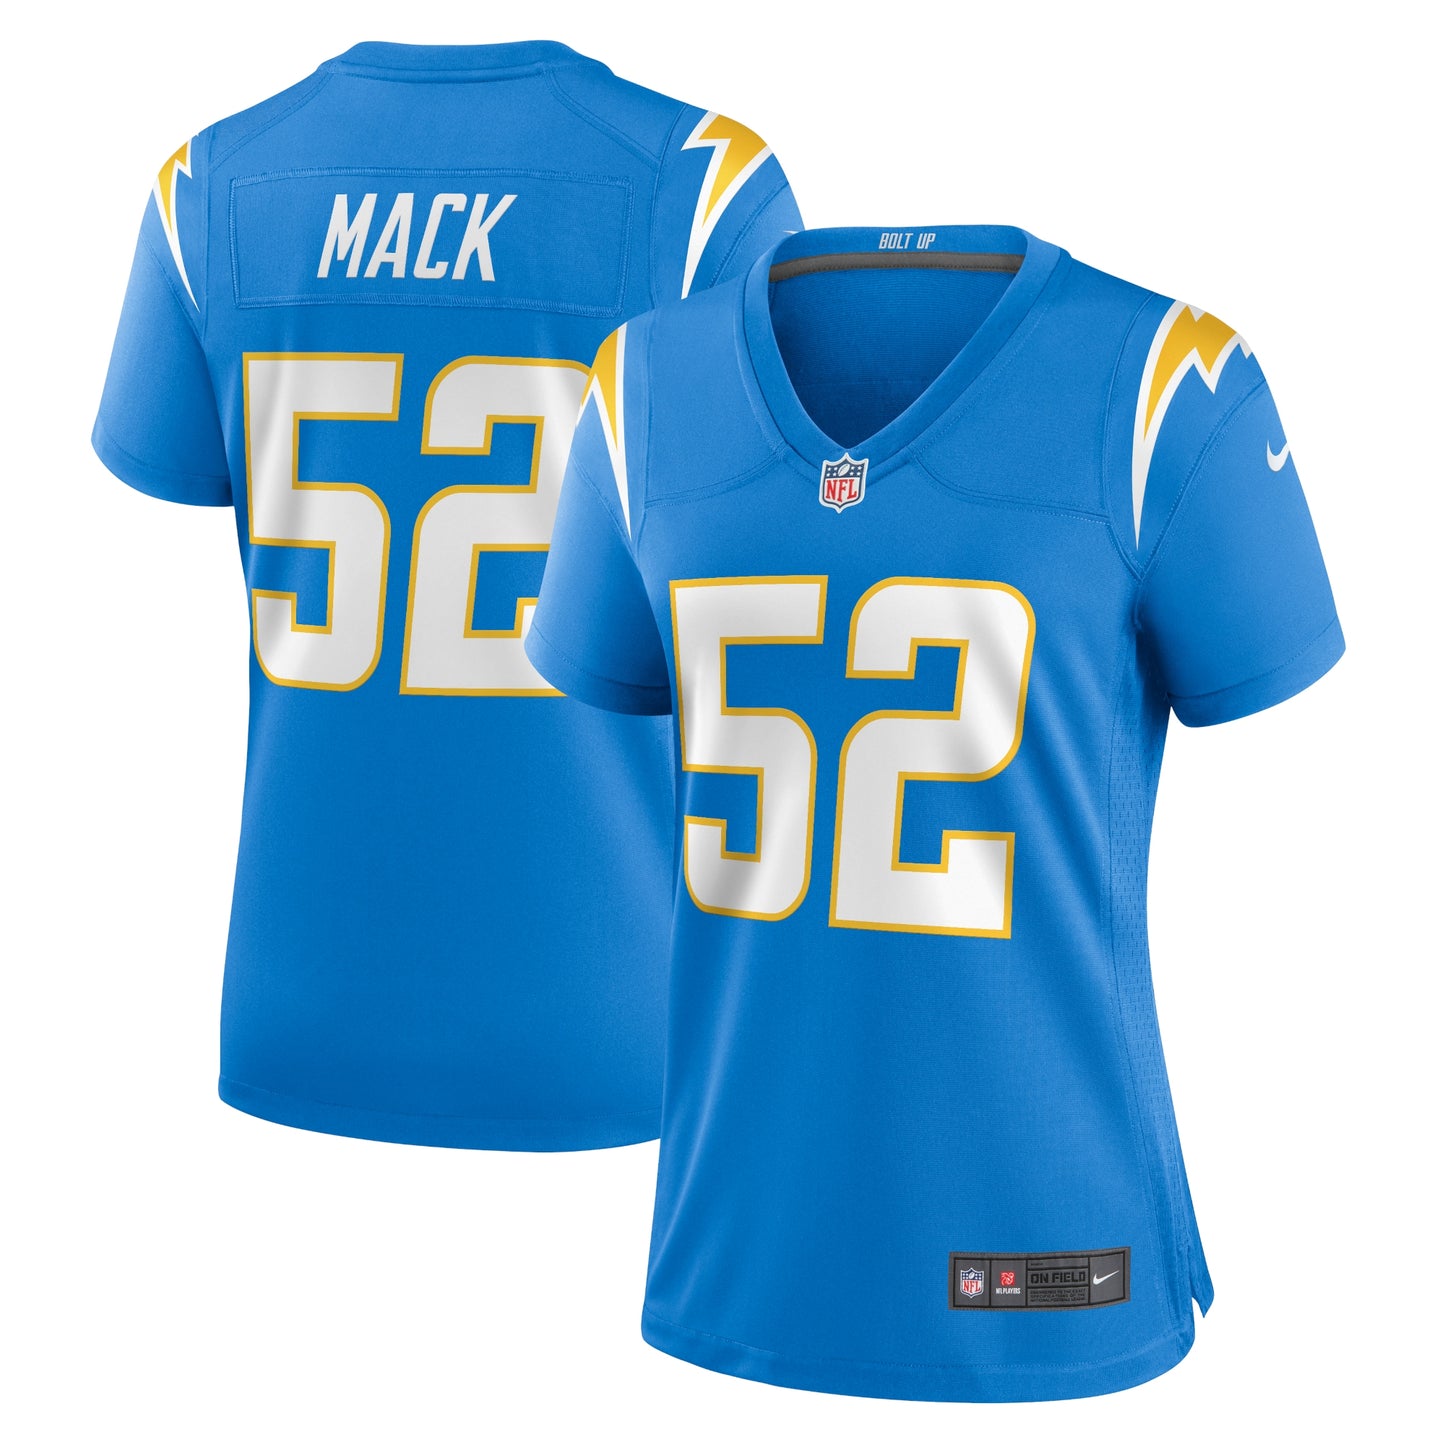 Khalil Mack Los Angeles Chargers Nike Women's Player Jersey - Powder Blue